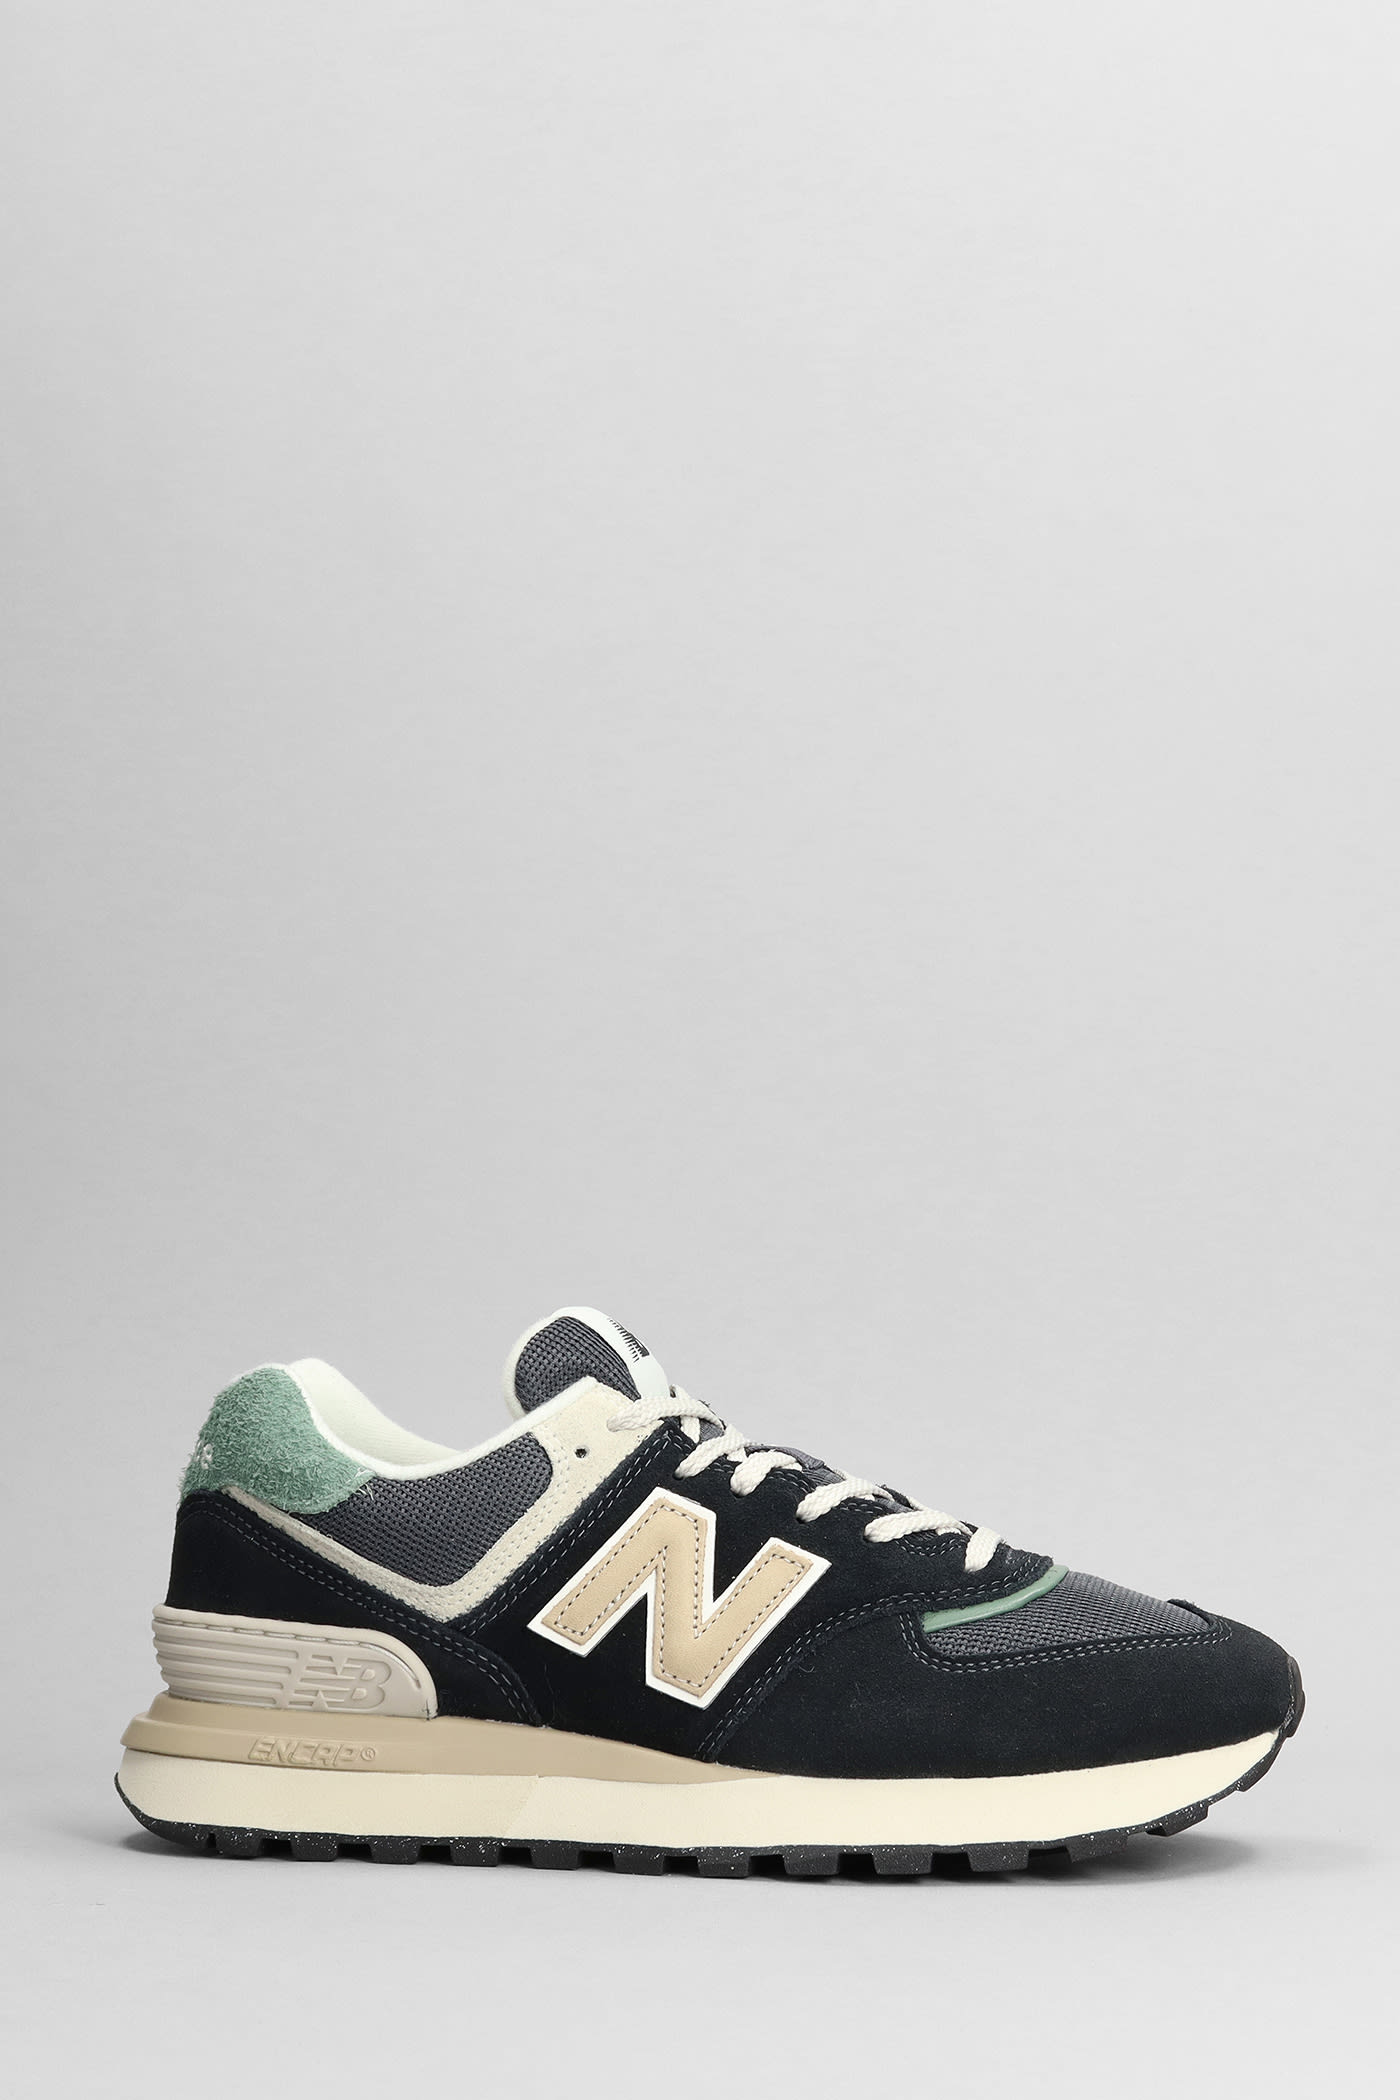 NEW BALANCE 574 SNEAKERS IN BLACK SUEDE AND FABRIC